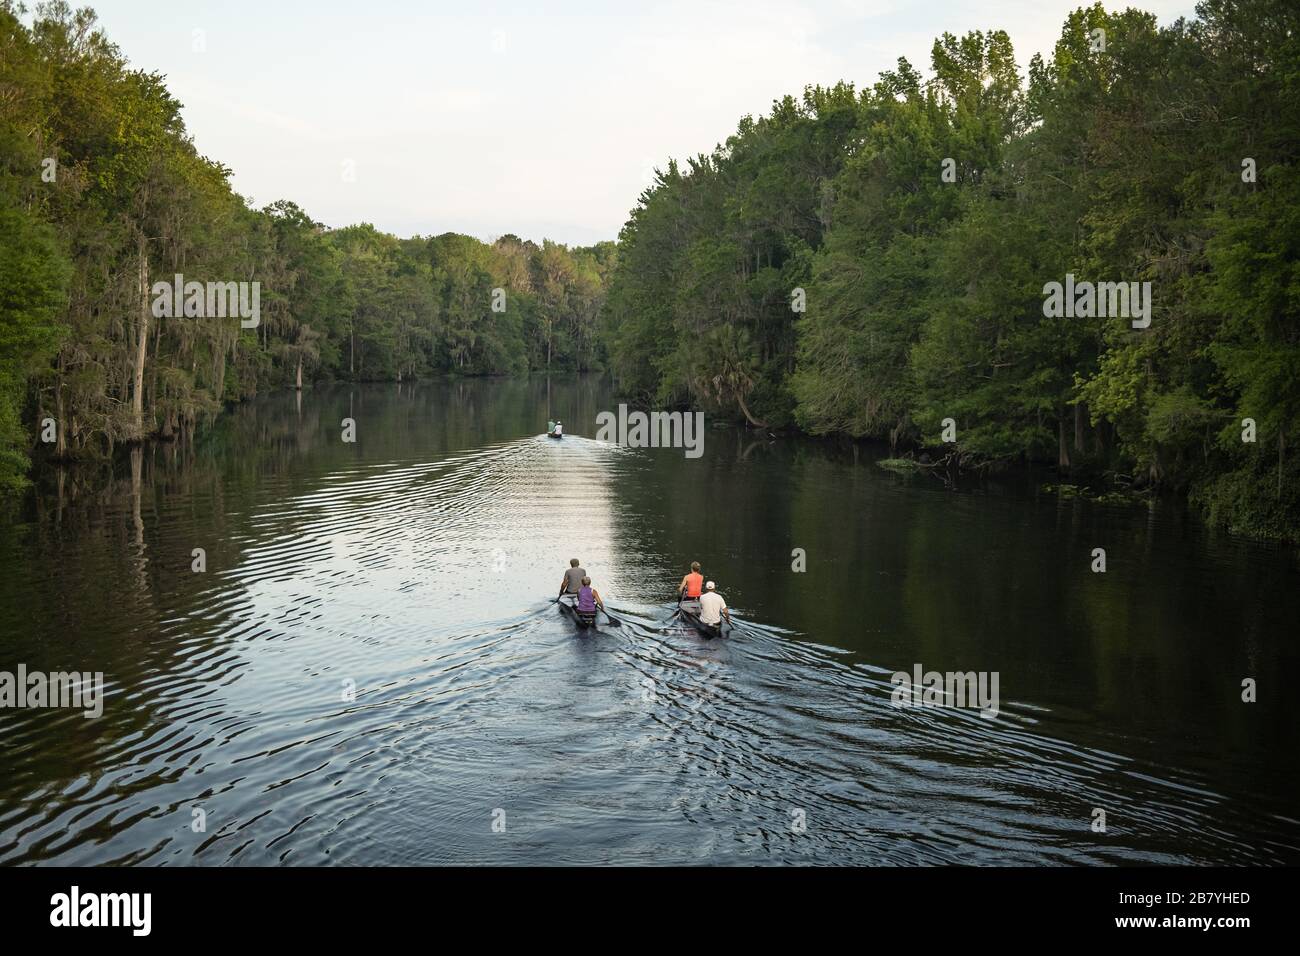 Canoeing on the Withlacoochee River in Dunnellon, Florida. Early morning paddle practice on a scenic FL river. Stock Photo